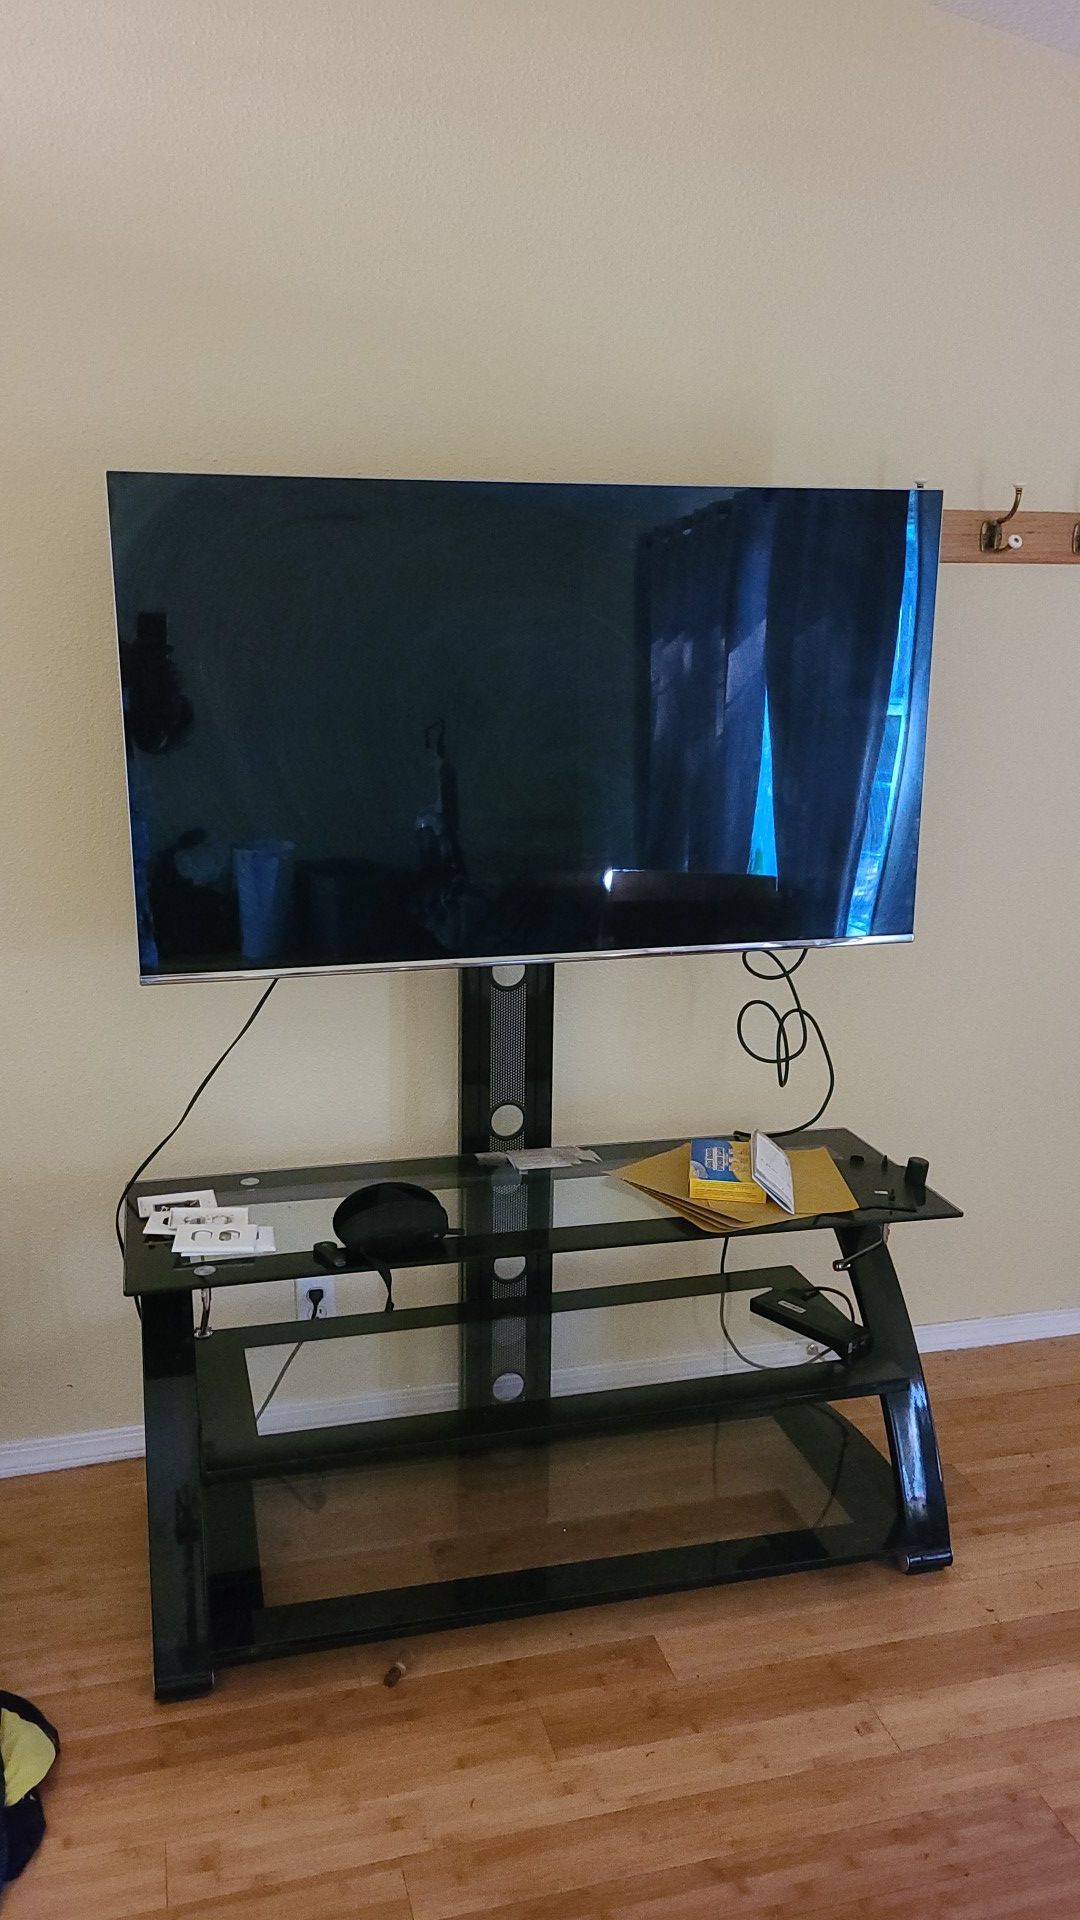 Samsung Ultra HD 4k 55" with stand